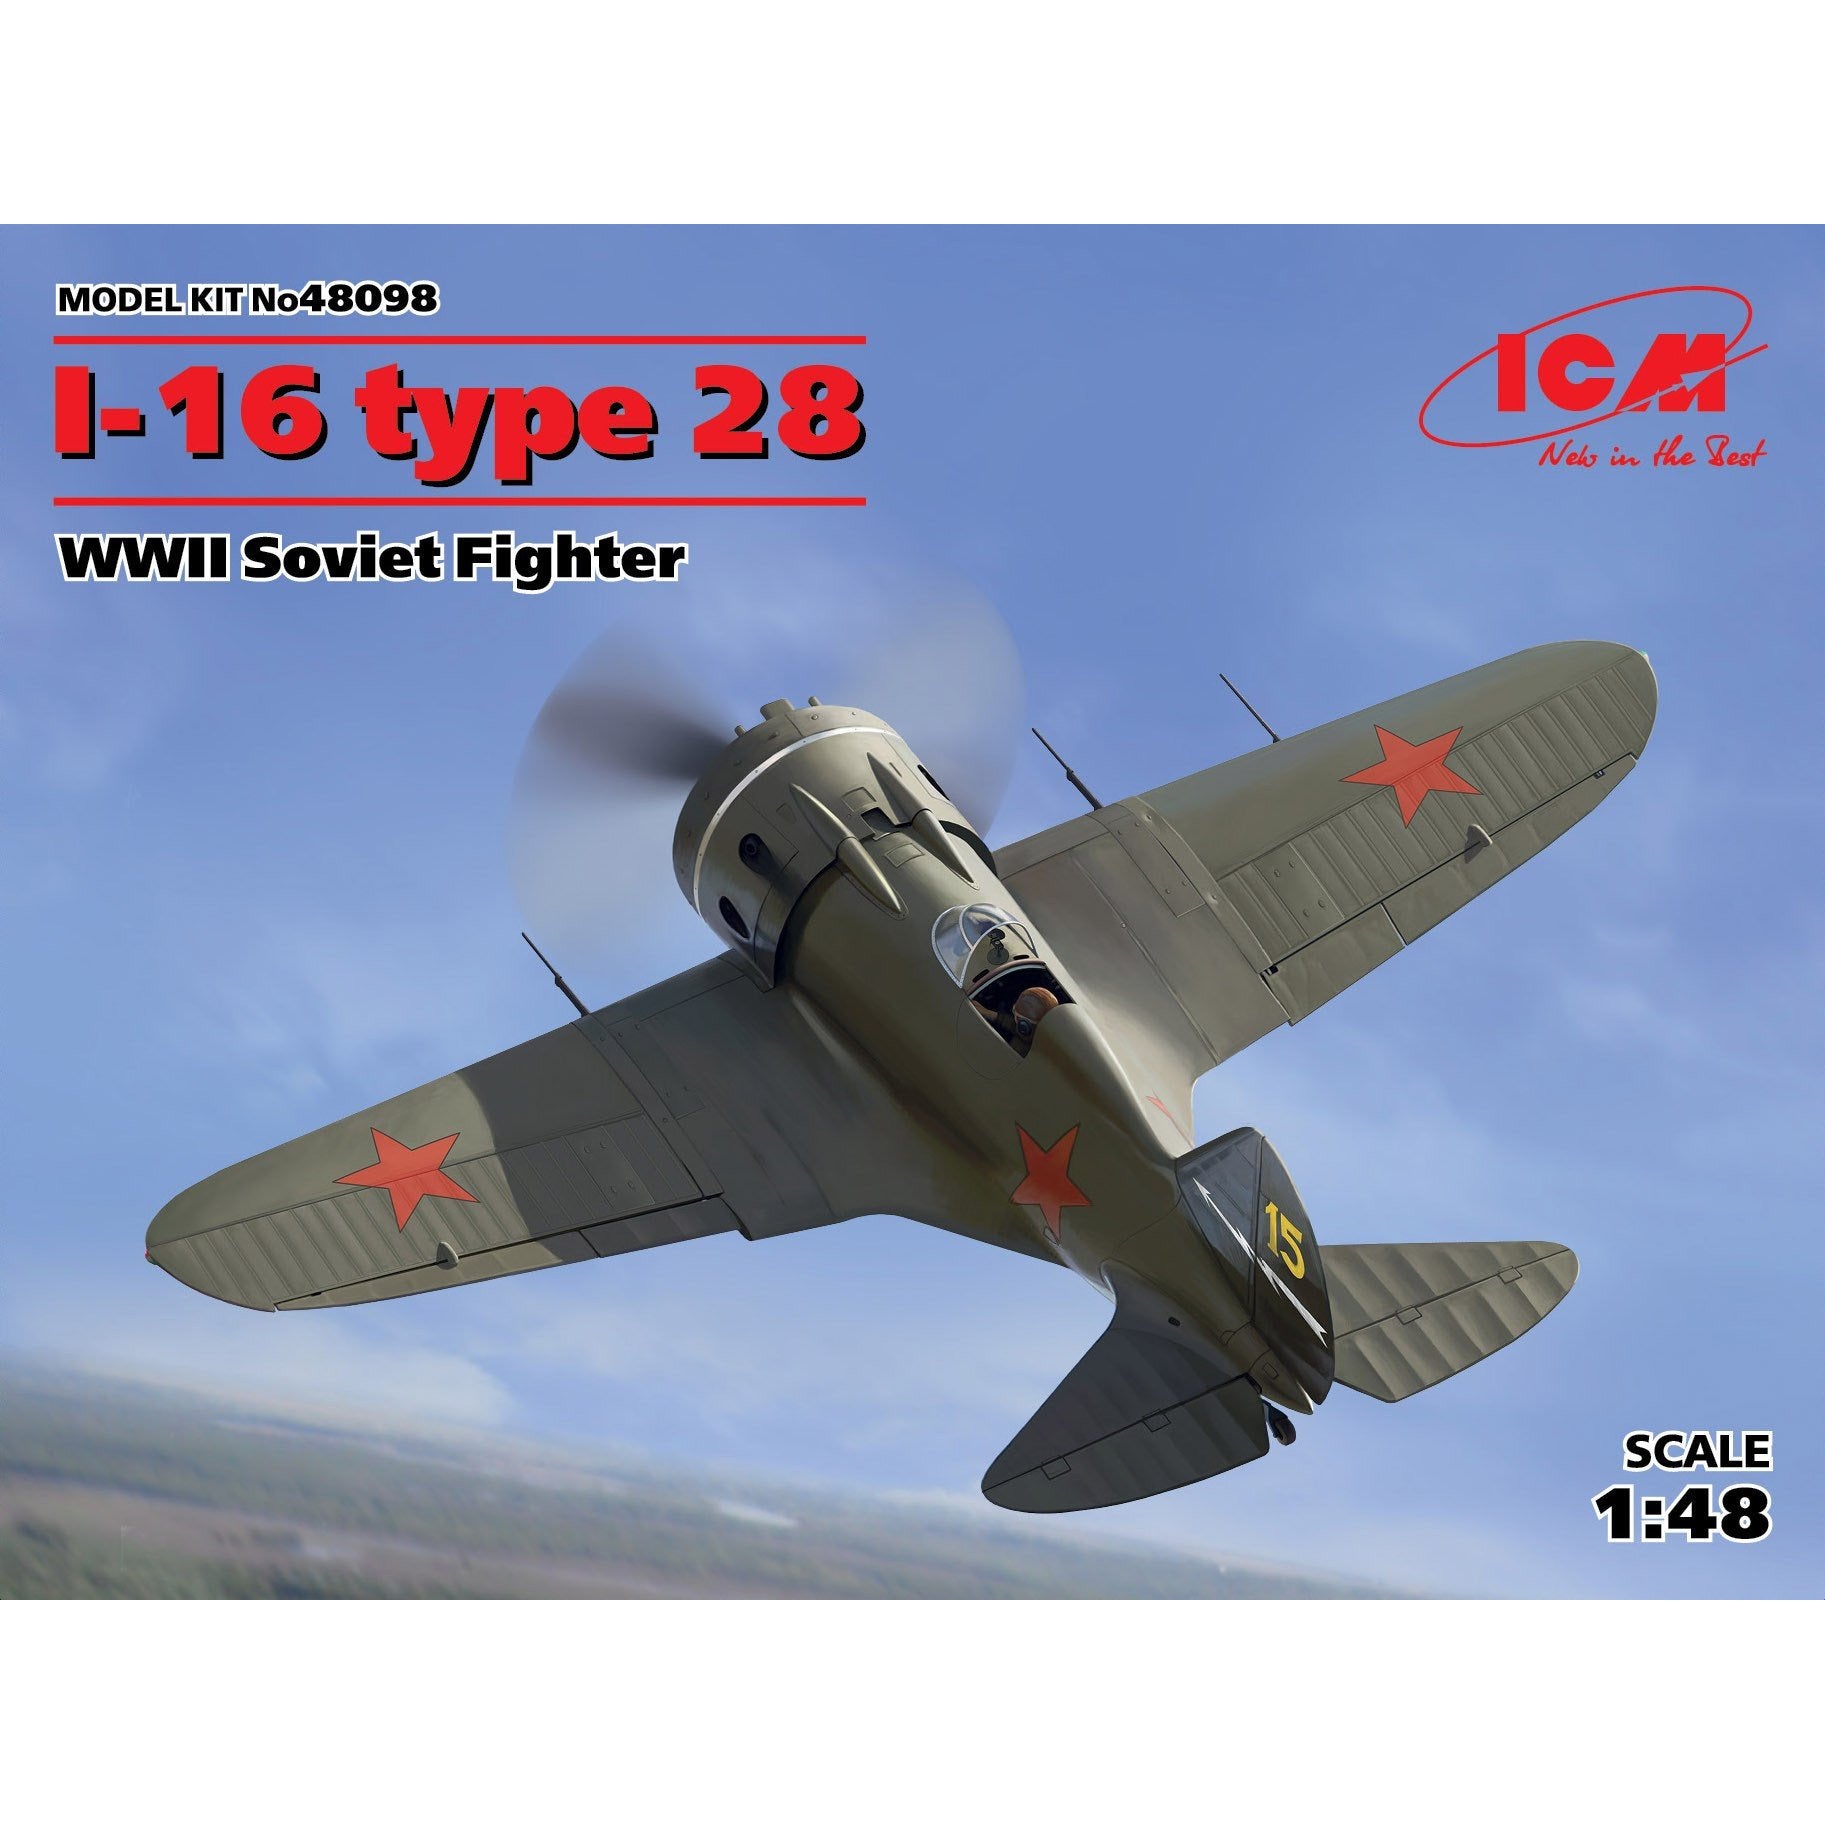 I-16 Type 28, WWII Soviet Fighter 1/48 by ICM